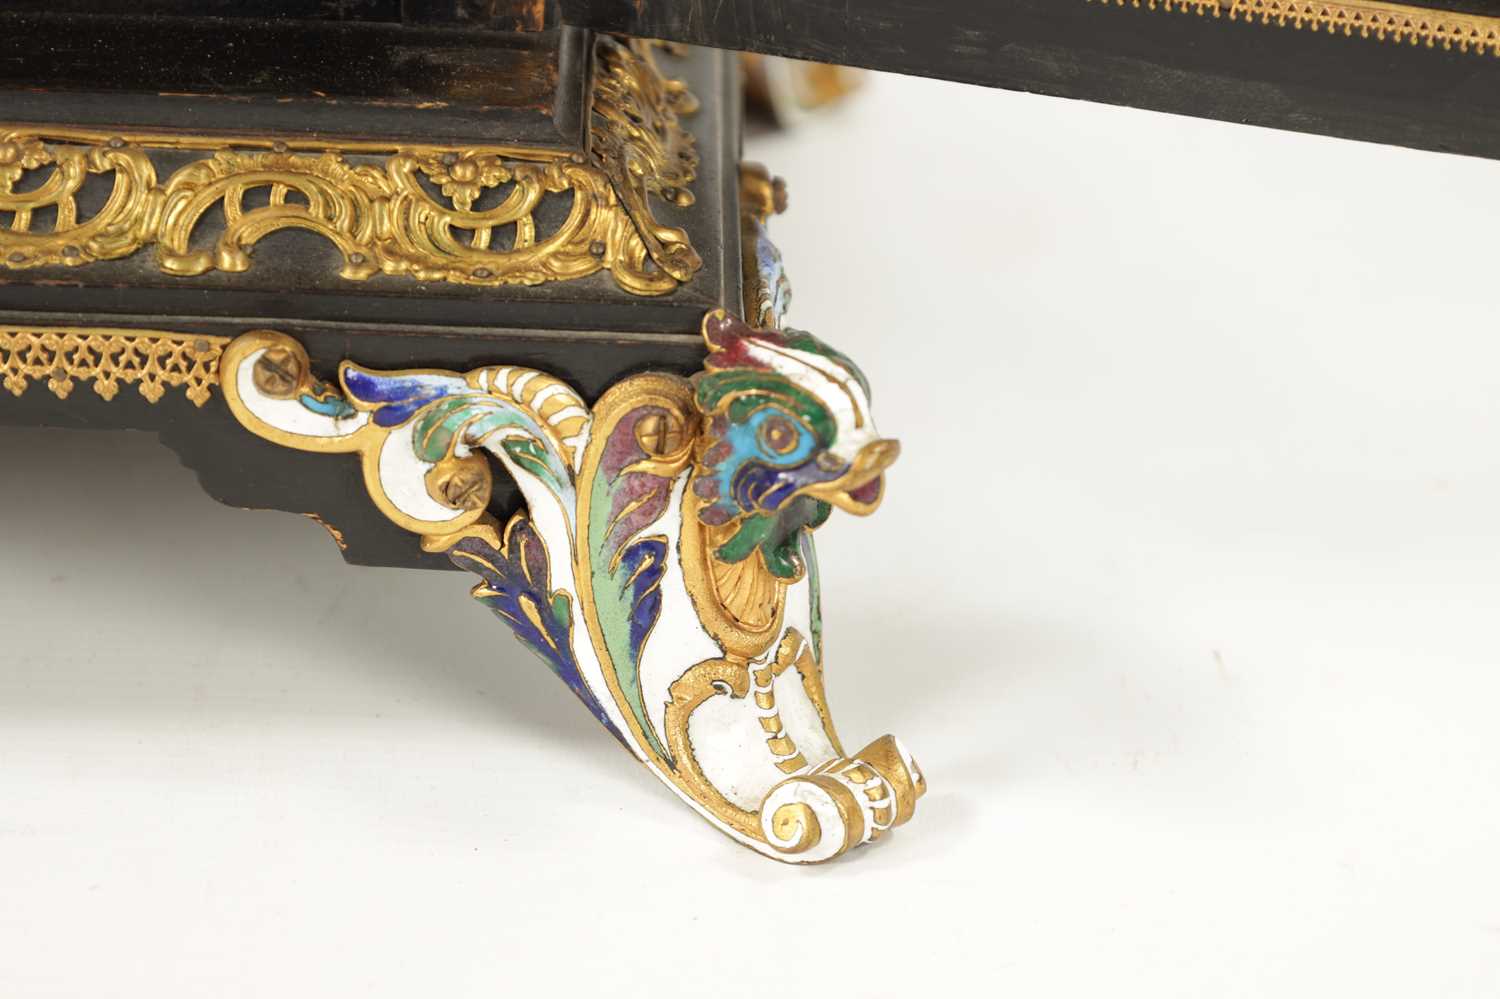 A FINE AND RARE EARLY/MID 19TH CENTURY AUSTRIAN EBONISED, PRESSED BRASS MOUNTED AND VIENNESE ENAMELL - Image 6 of 14